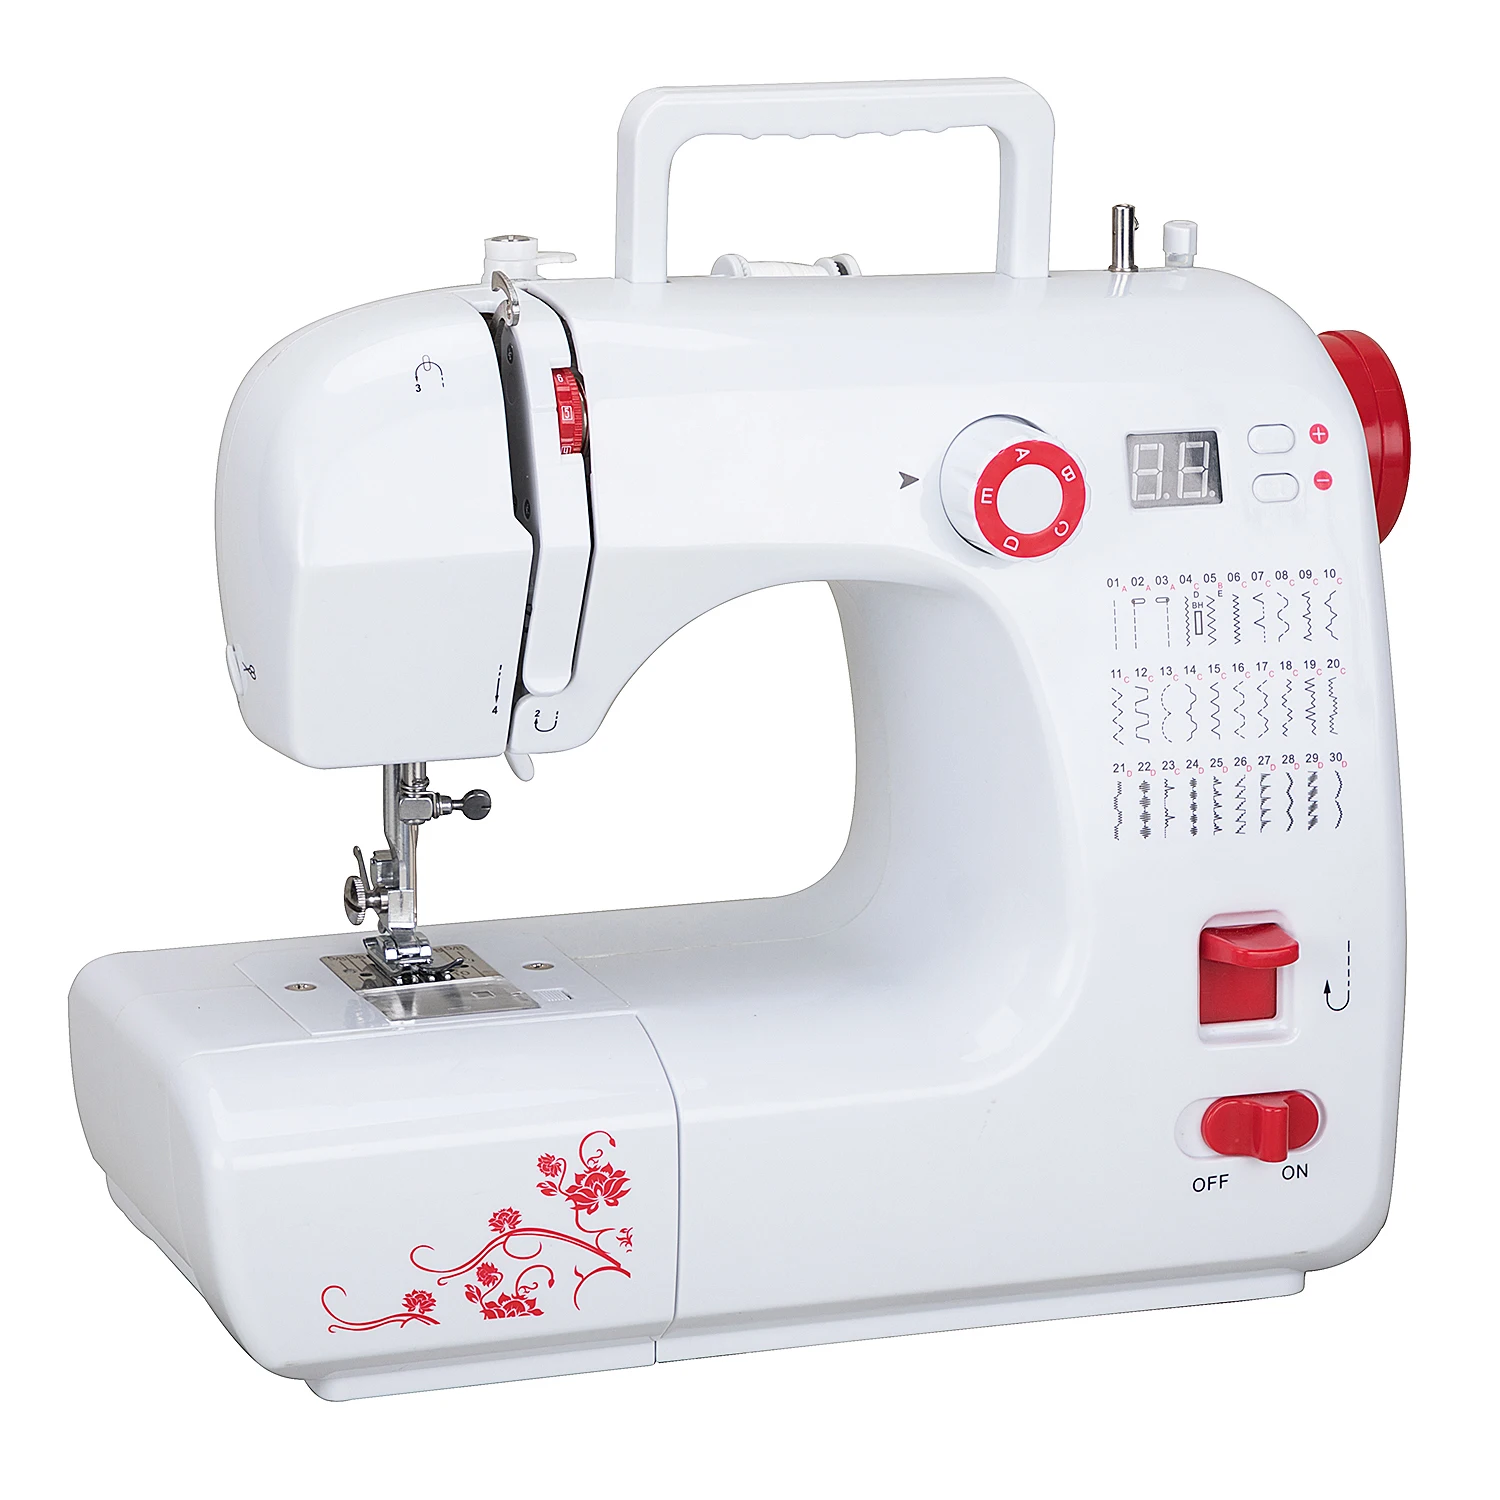 

FHSM-702 needle household mini sewing machine with light